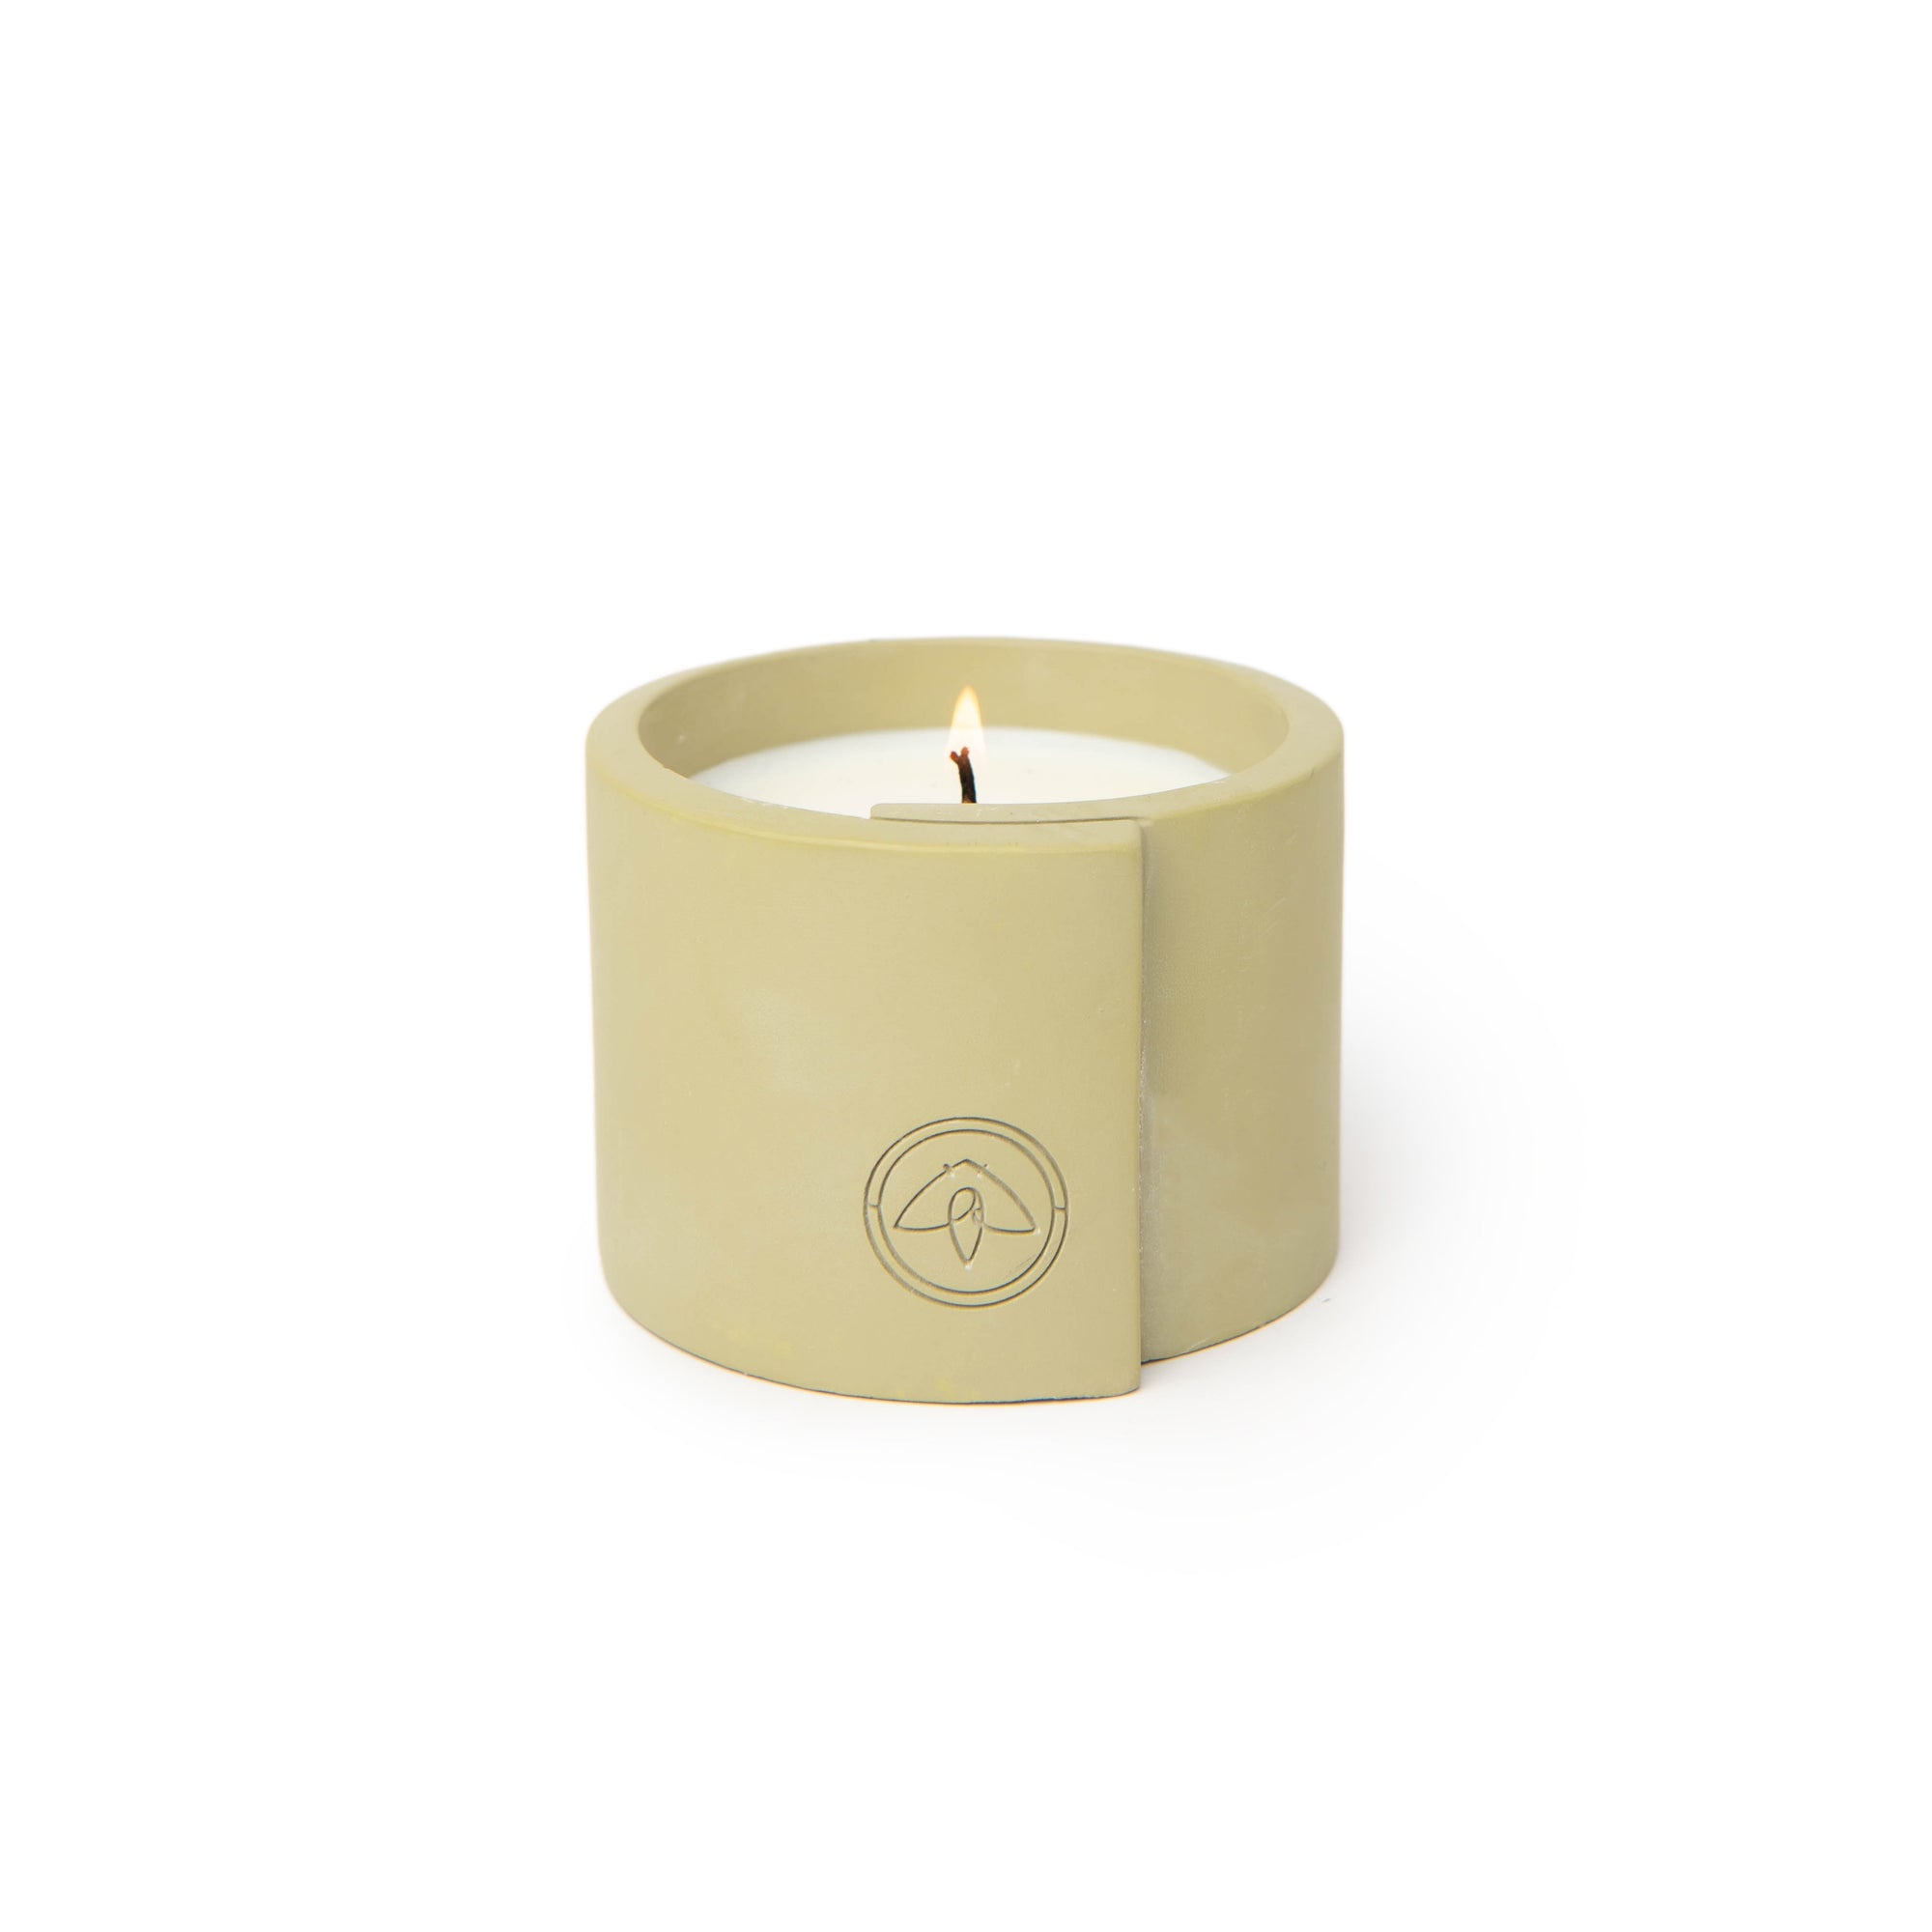 The Cirque Cement Candle